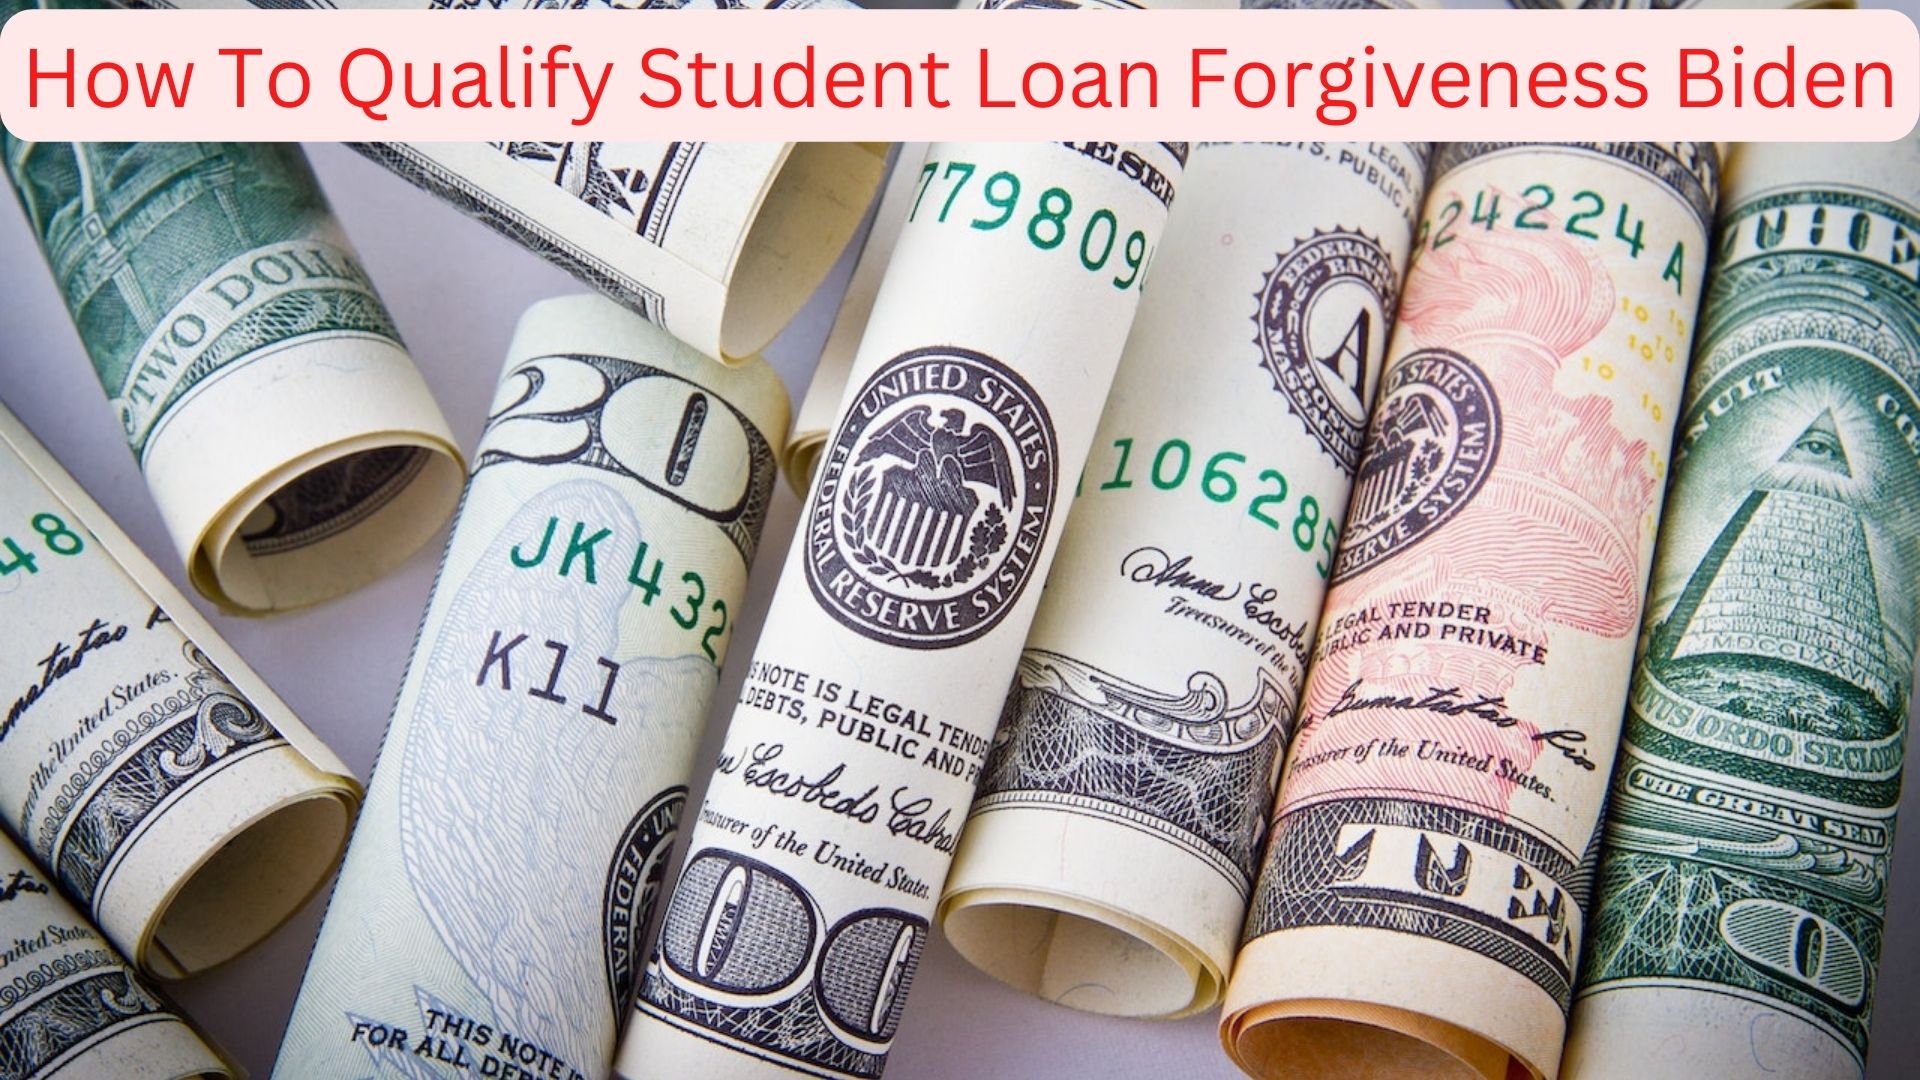 How To Qualify Student Loan Forgiveness Biden?